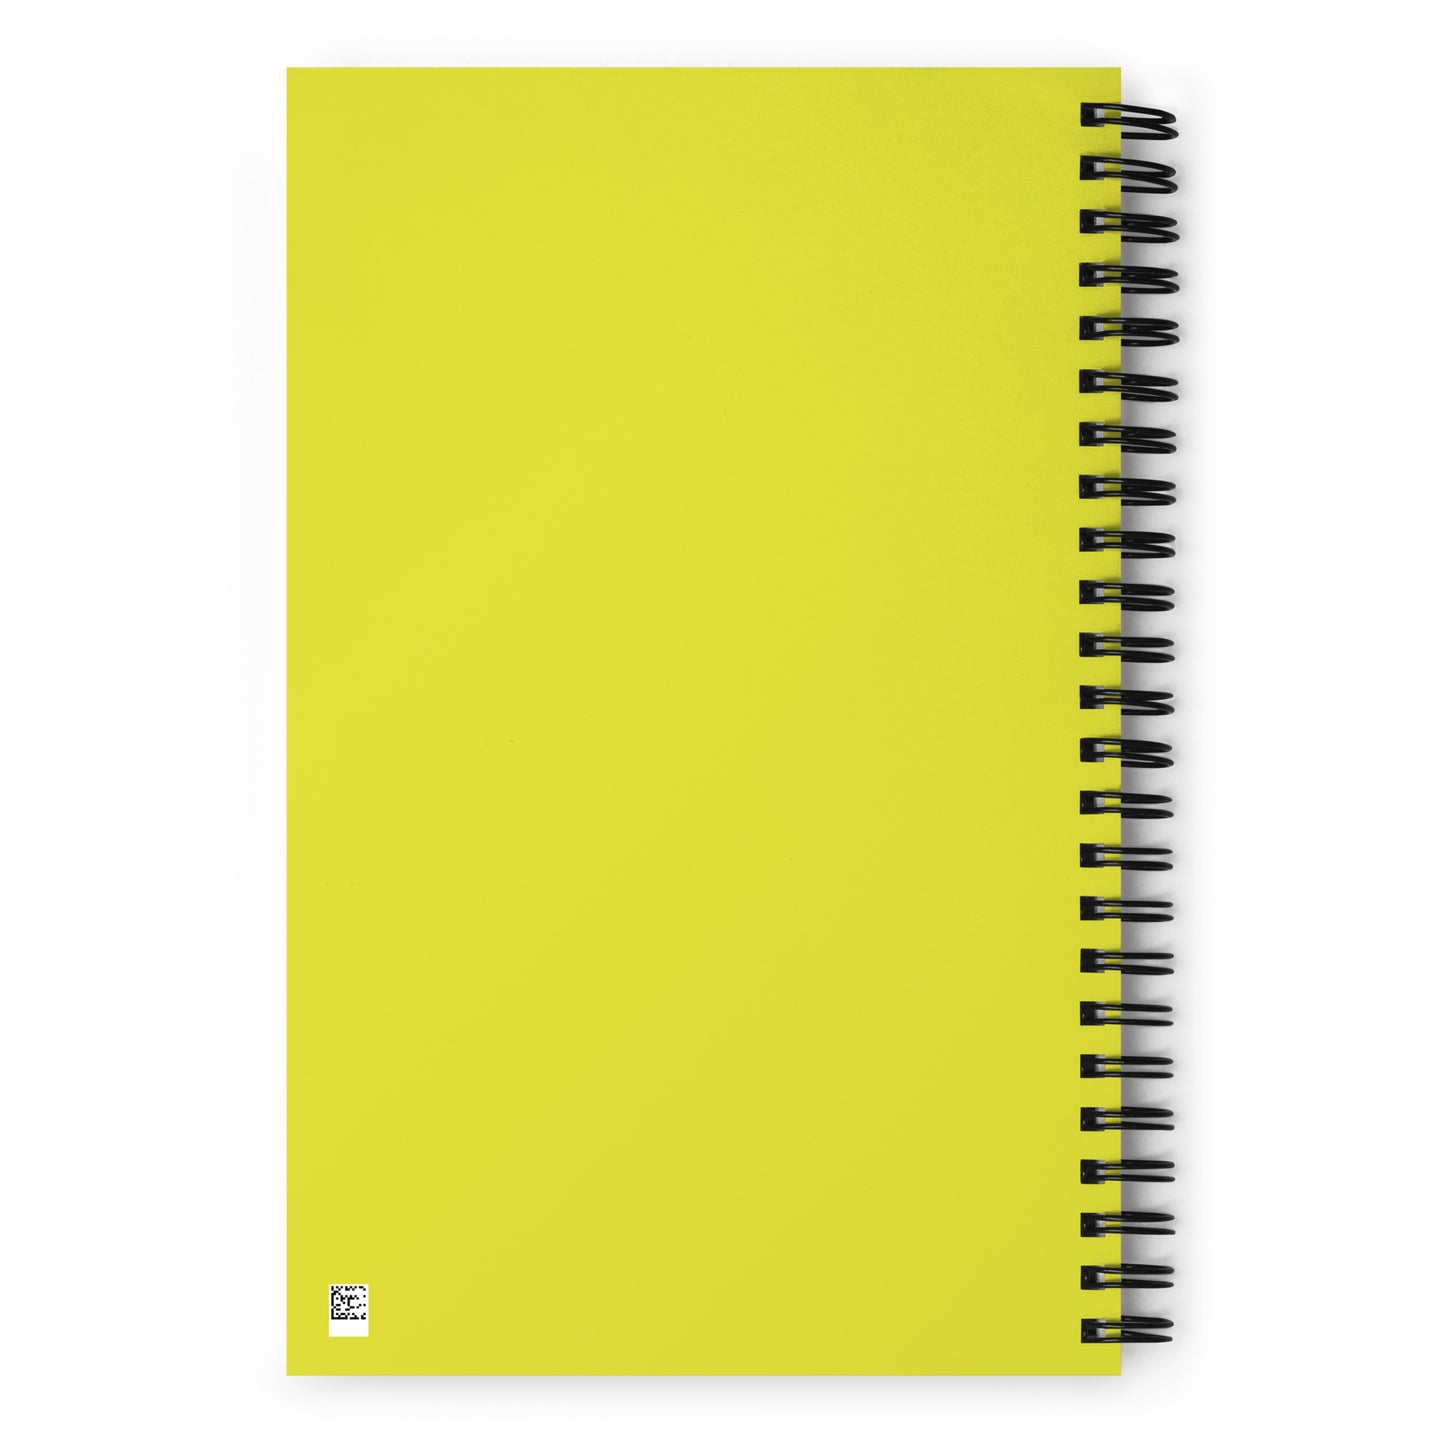 Aviation Gift Spiral Notebook - Yellow • ICN Seoul • YHM Designs - Image 02